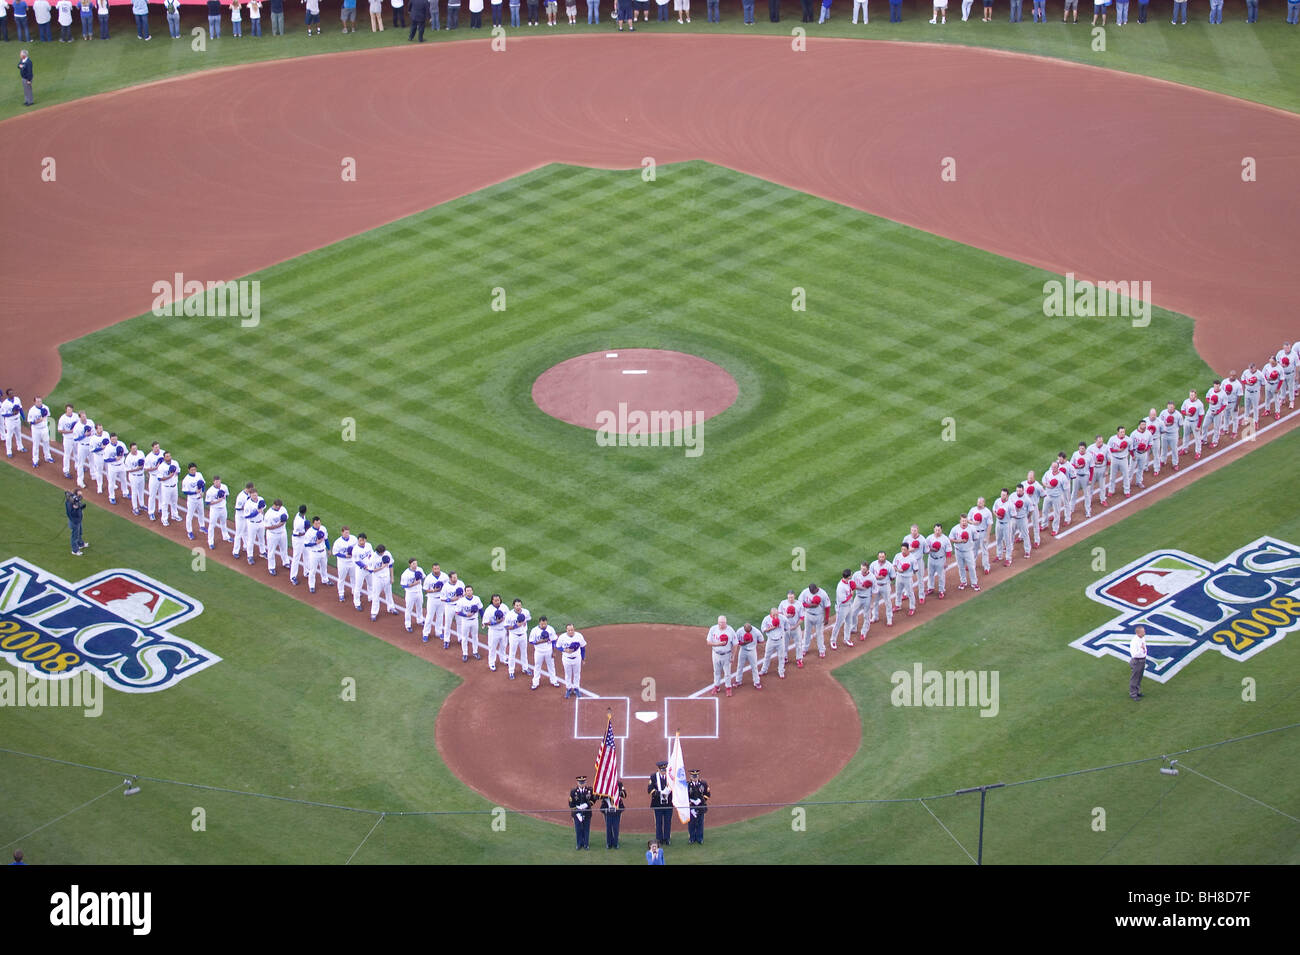 Opening ceremony of National League Championship Series (NLCS), Dodger Stadium, Los Angeles, CA on October 12, 2008 Stock Photo